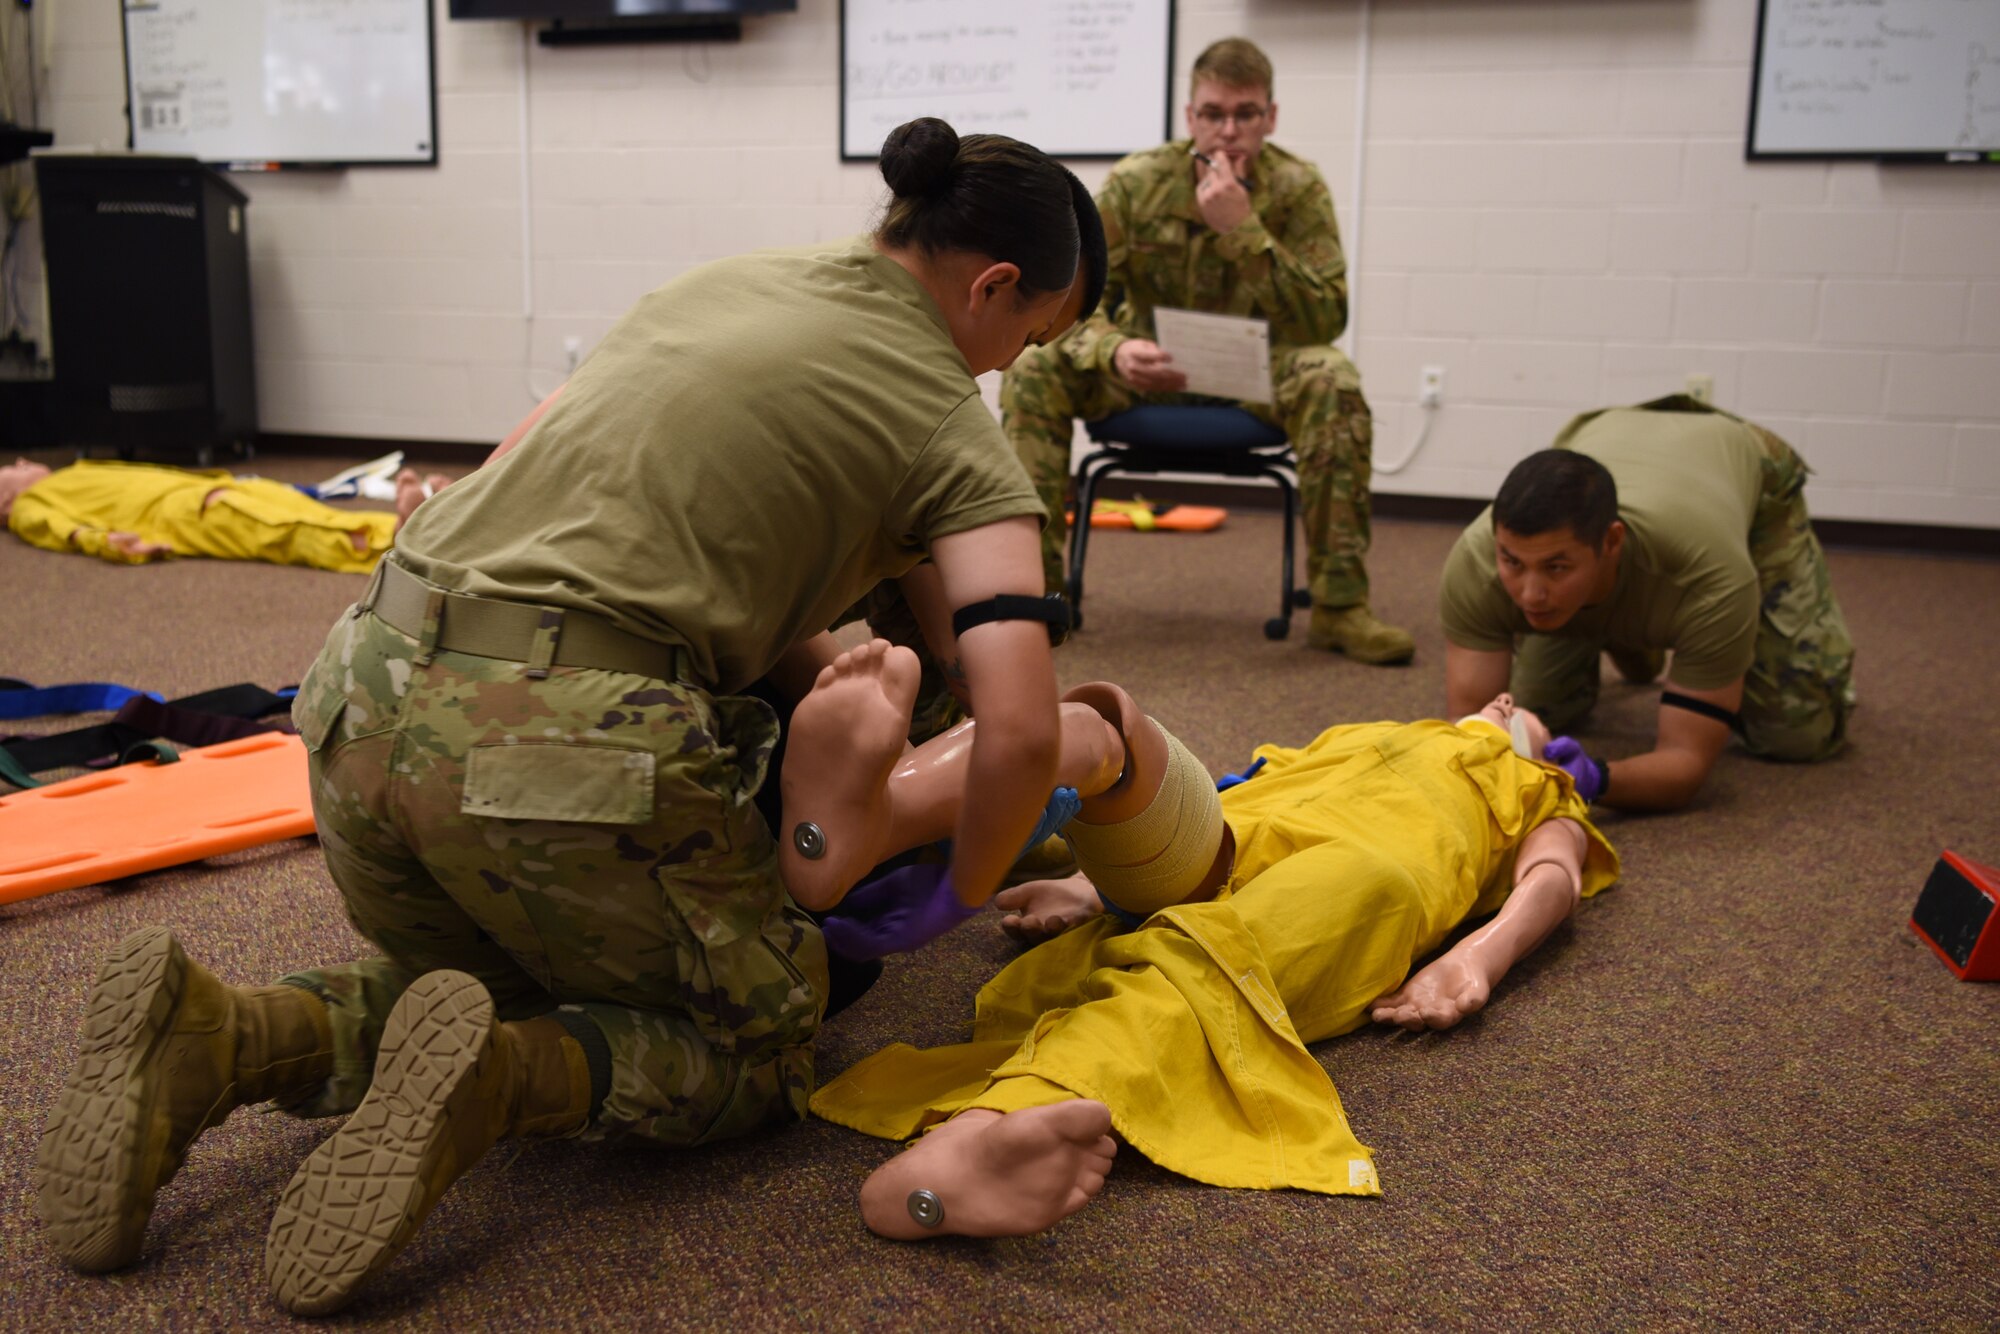 Joint service students assigned to the 312th Training Squadron, control the bleeding of a simulated open wound on an artificial victim’s lower extremity, during an Emergency Medical Responder psychomotor skills evaluation at Goodfellow Air Force Base, Texas, May 6, 2022. After securing the tourniquet, the students tightened it until they could not feel a distal pulse, which stops the bleeding in a real life situation. (U.S. Air Force photo by Senior Airman Abbey Rieves)